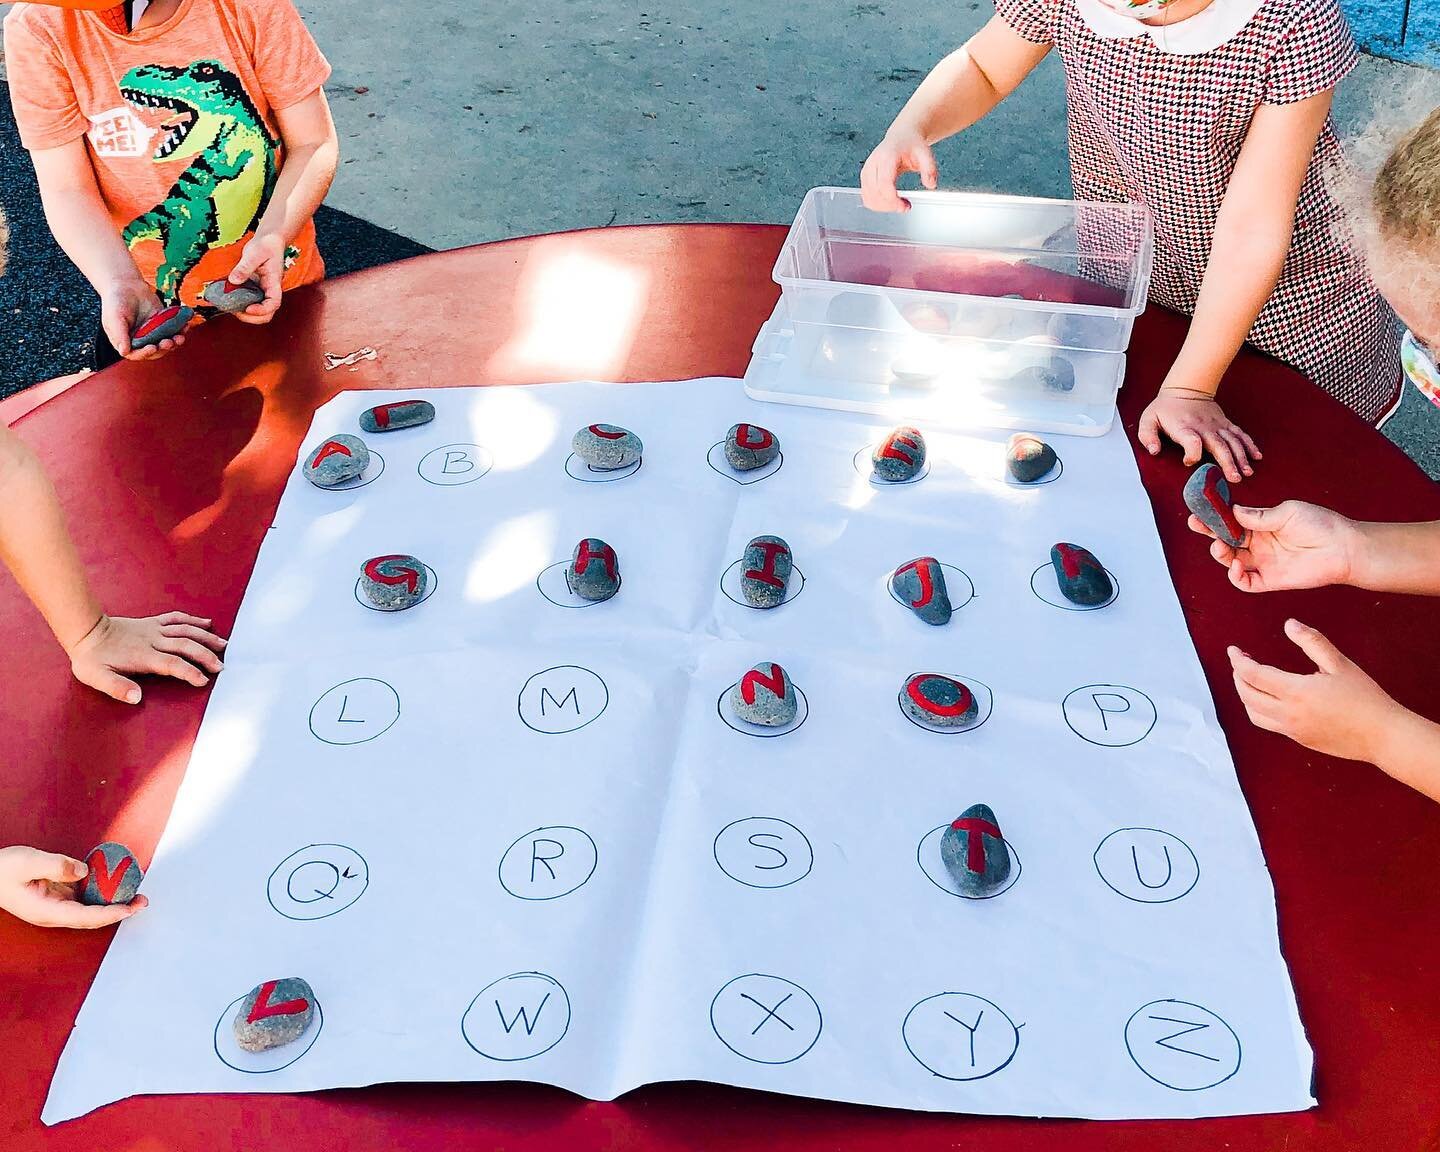 Matching painted letter rocks to their paper partners with friends is fun.

Image Description: Four students at a red table match rocks painted with red letters to the letters inside circles on a giant white paper.

#preschool #preschoolActivities #E